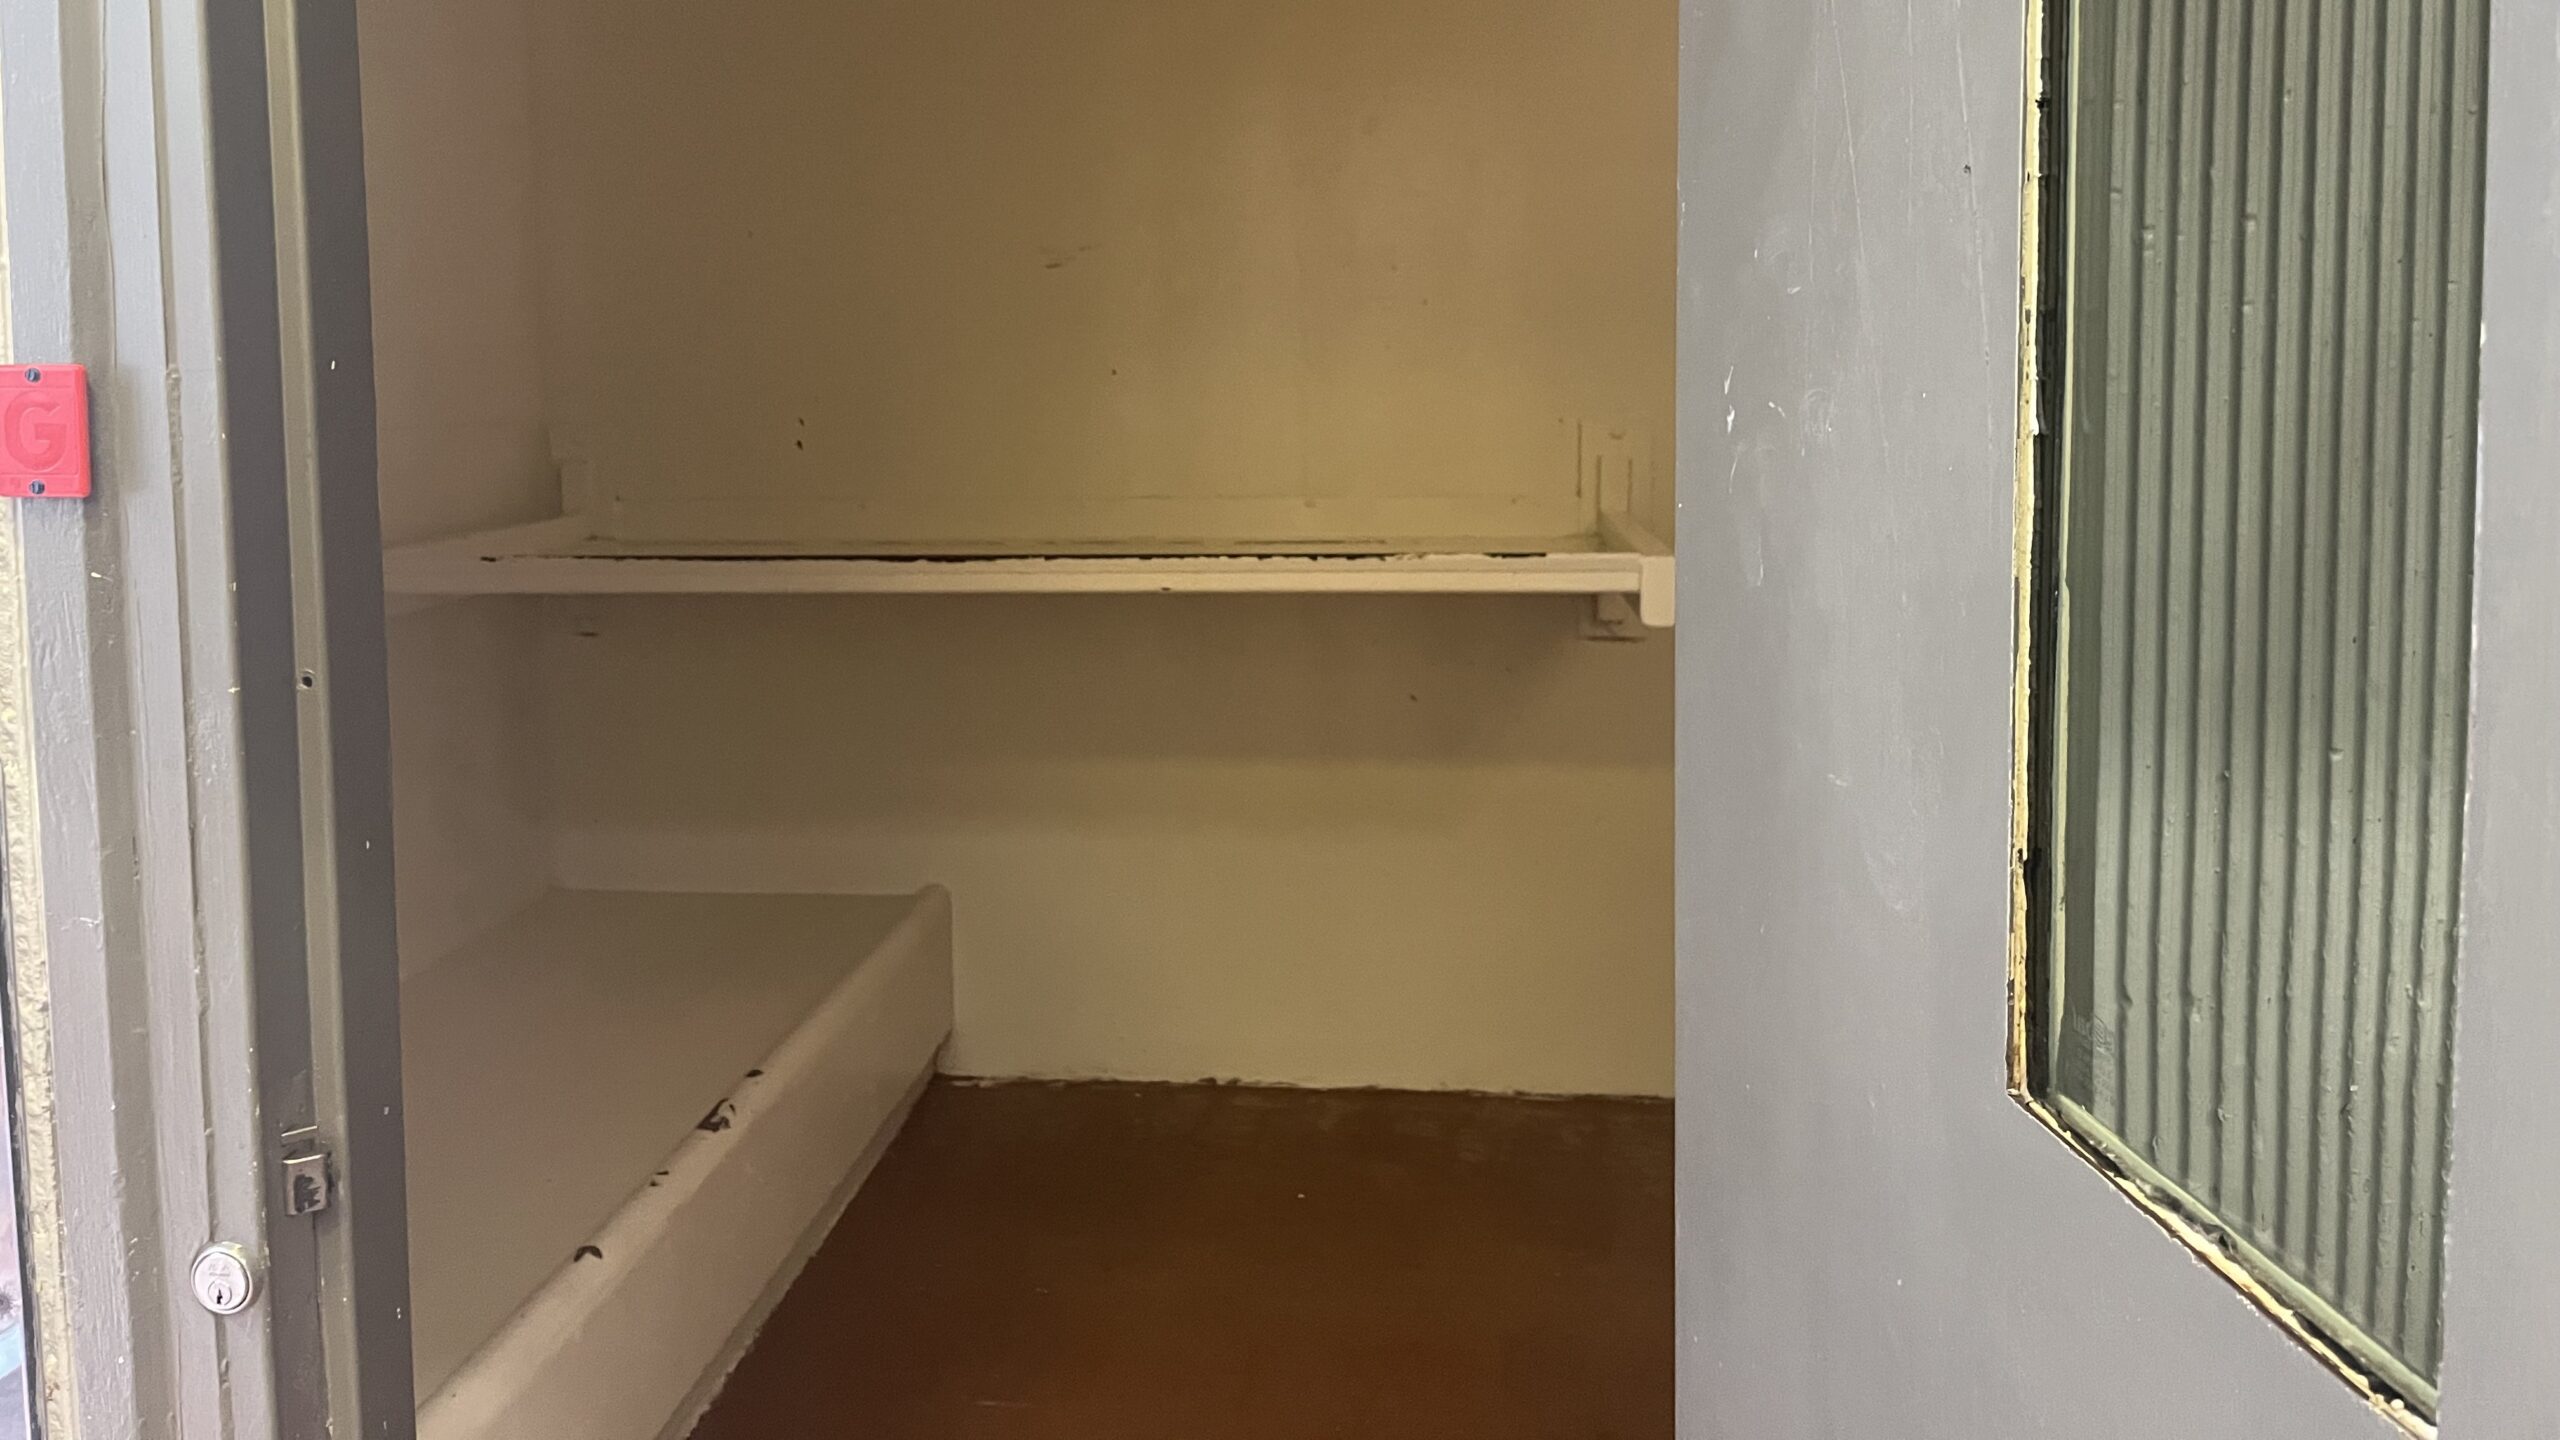 A door stand ajar to a cell in the Santa Cruz Main Jail. There is a built in bench and shelf.